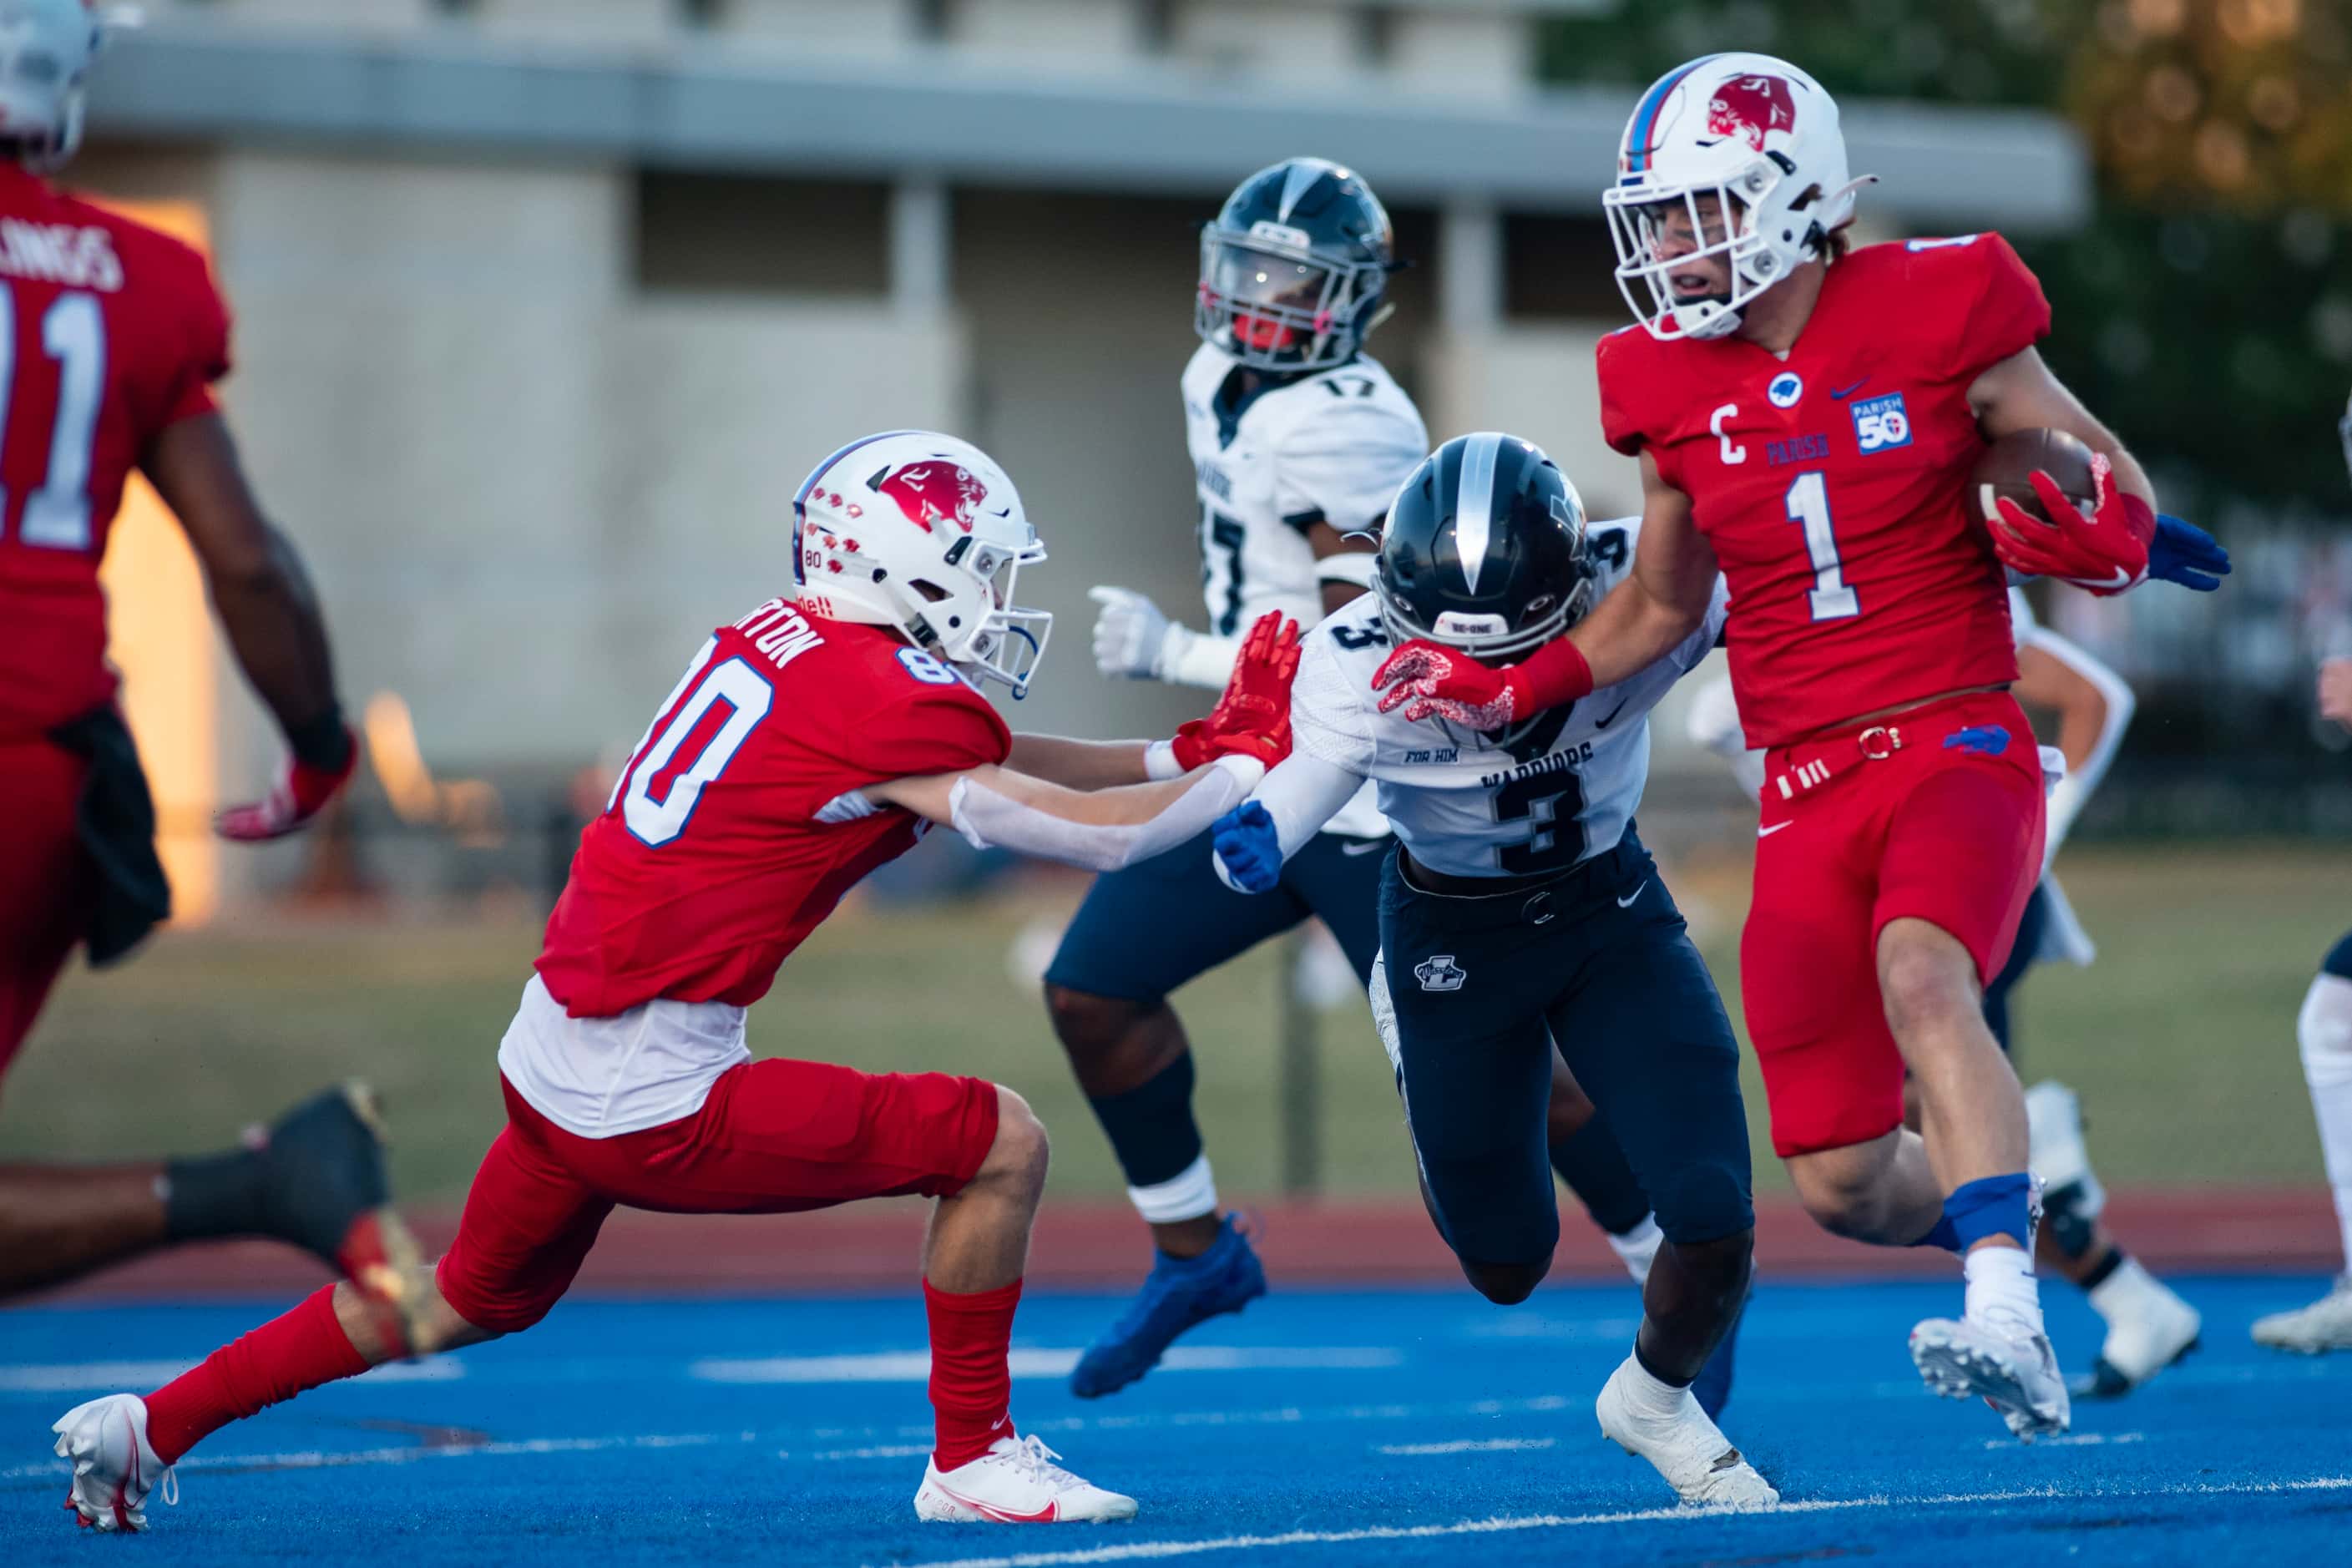 Parish Episcopal senior Blake Youngblood (1) looks to get around a defender as he gains...